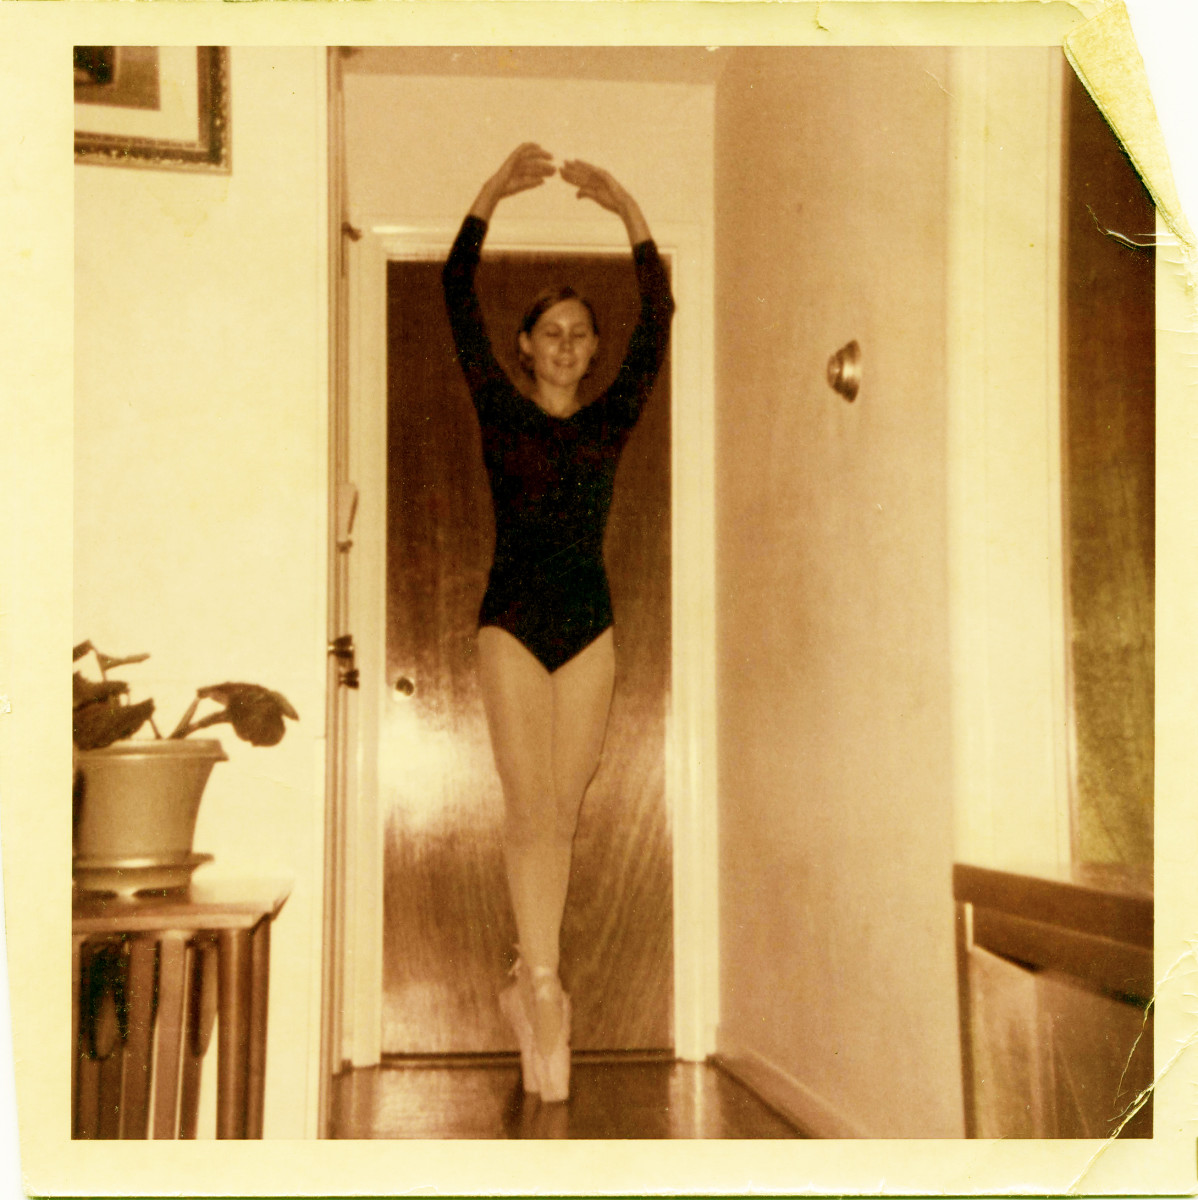 Here I am doing my thing on pointe in the hallway. I'm sure everyone in the family grew weary of my non-stop dancing.